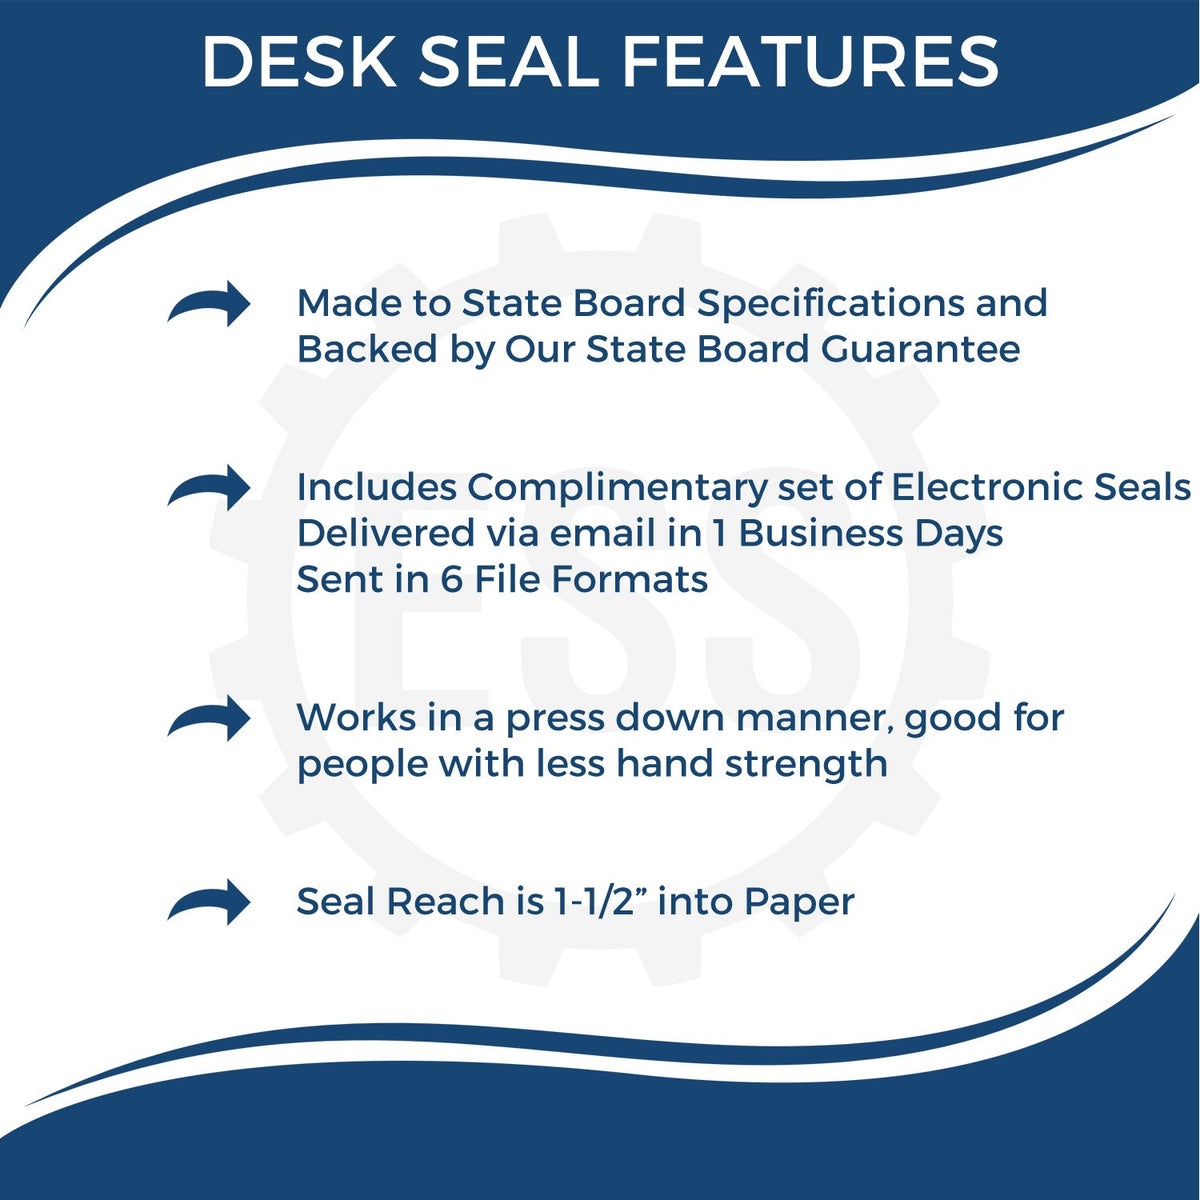 A picture of an infographic highlighting the selling points for the Connecticut Desk Surveyor Seal Embosser